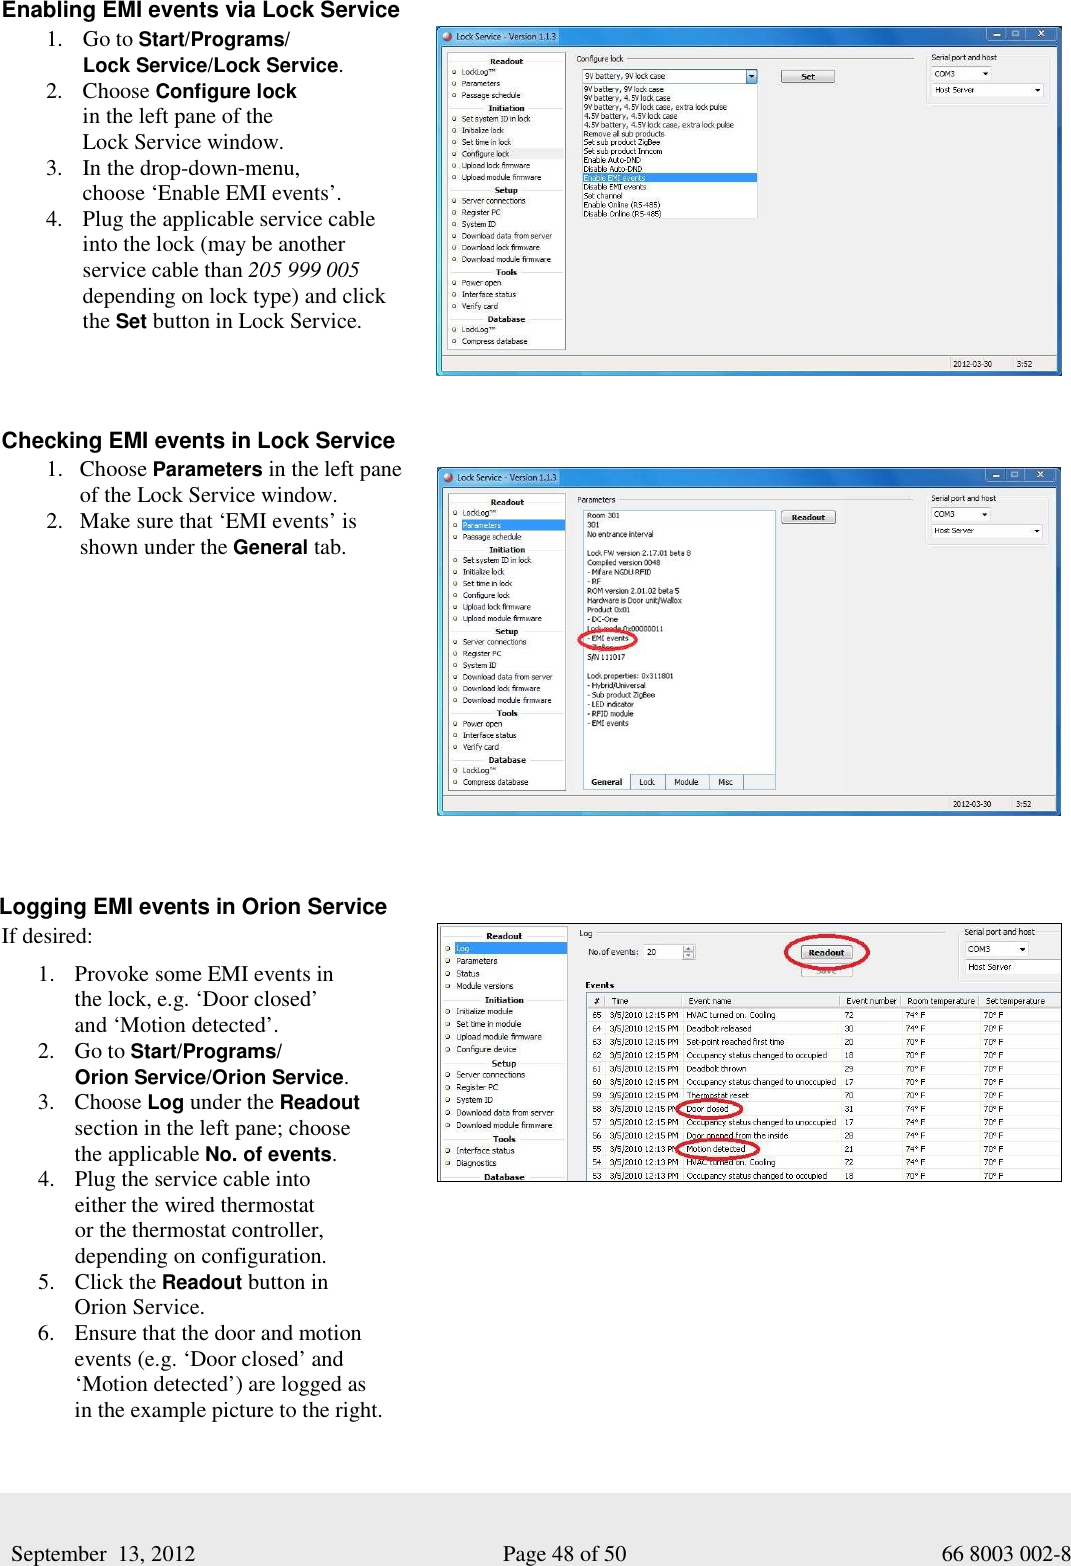     September  13, 2012                                                      Page 48 of 50                                           66 8003 002-8 Enabling EMI events via Lock Service 1. Go to Start/Programs/ Lock Service/Lock Service.  2. Choose Configure lock  in the left pane of the  Lock Service window.  3. In the drop-down-menu,  choose ‘Enable EMI events’. 4. Plug the applicable service cable  into the lock (may be another  service cable than 205 999 005        depending on lock type) and click the Set button in Lock Service.      Checking EMI events in Lock Service  1. Choose Parameters in the left pane of the Lock Service window.  2. Make sure that ‘EMI events’ is  shown under the General tab.     Logging EMI events in Orion Service  If desired: 1. Provoke some EMI events in  the lock, e.g. ‘Door closed’  and ‘Motion detected’. 2. Go to Start/Programs/ Orion Service/Orion Service.  3. Choose Log under the Readout section in the left pane; choose  the applicable No. of events.  4. Plug the service cable into  either the wired thermostat  or the thermostat controller,  depending on configuration.  5. Click the Readout button in  Orion Service.  6. Ensure that the door and motion events (e.g. ‘Door closed’ and ‘Motion detected’) are logged as  in the example picture to the right.   